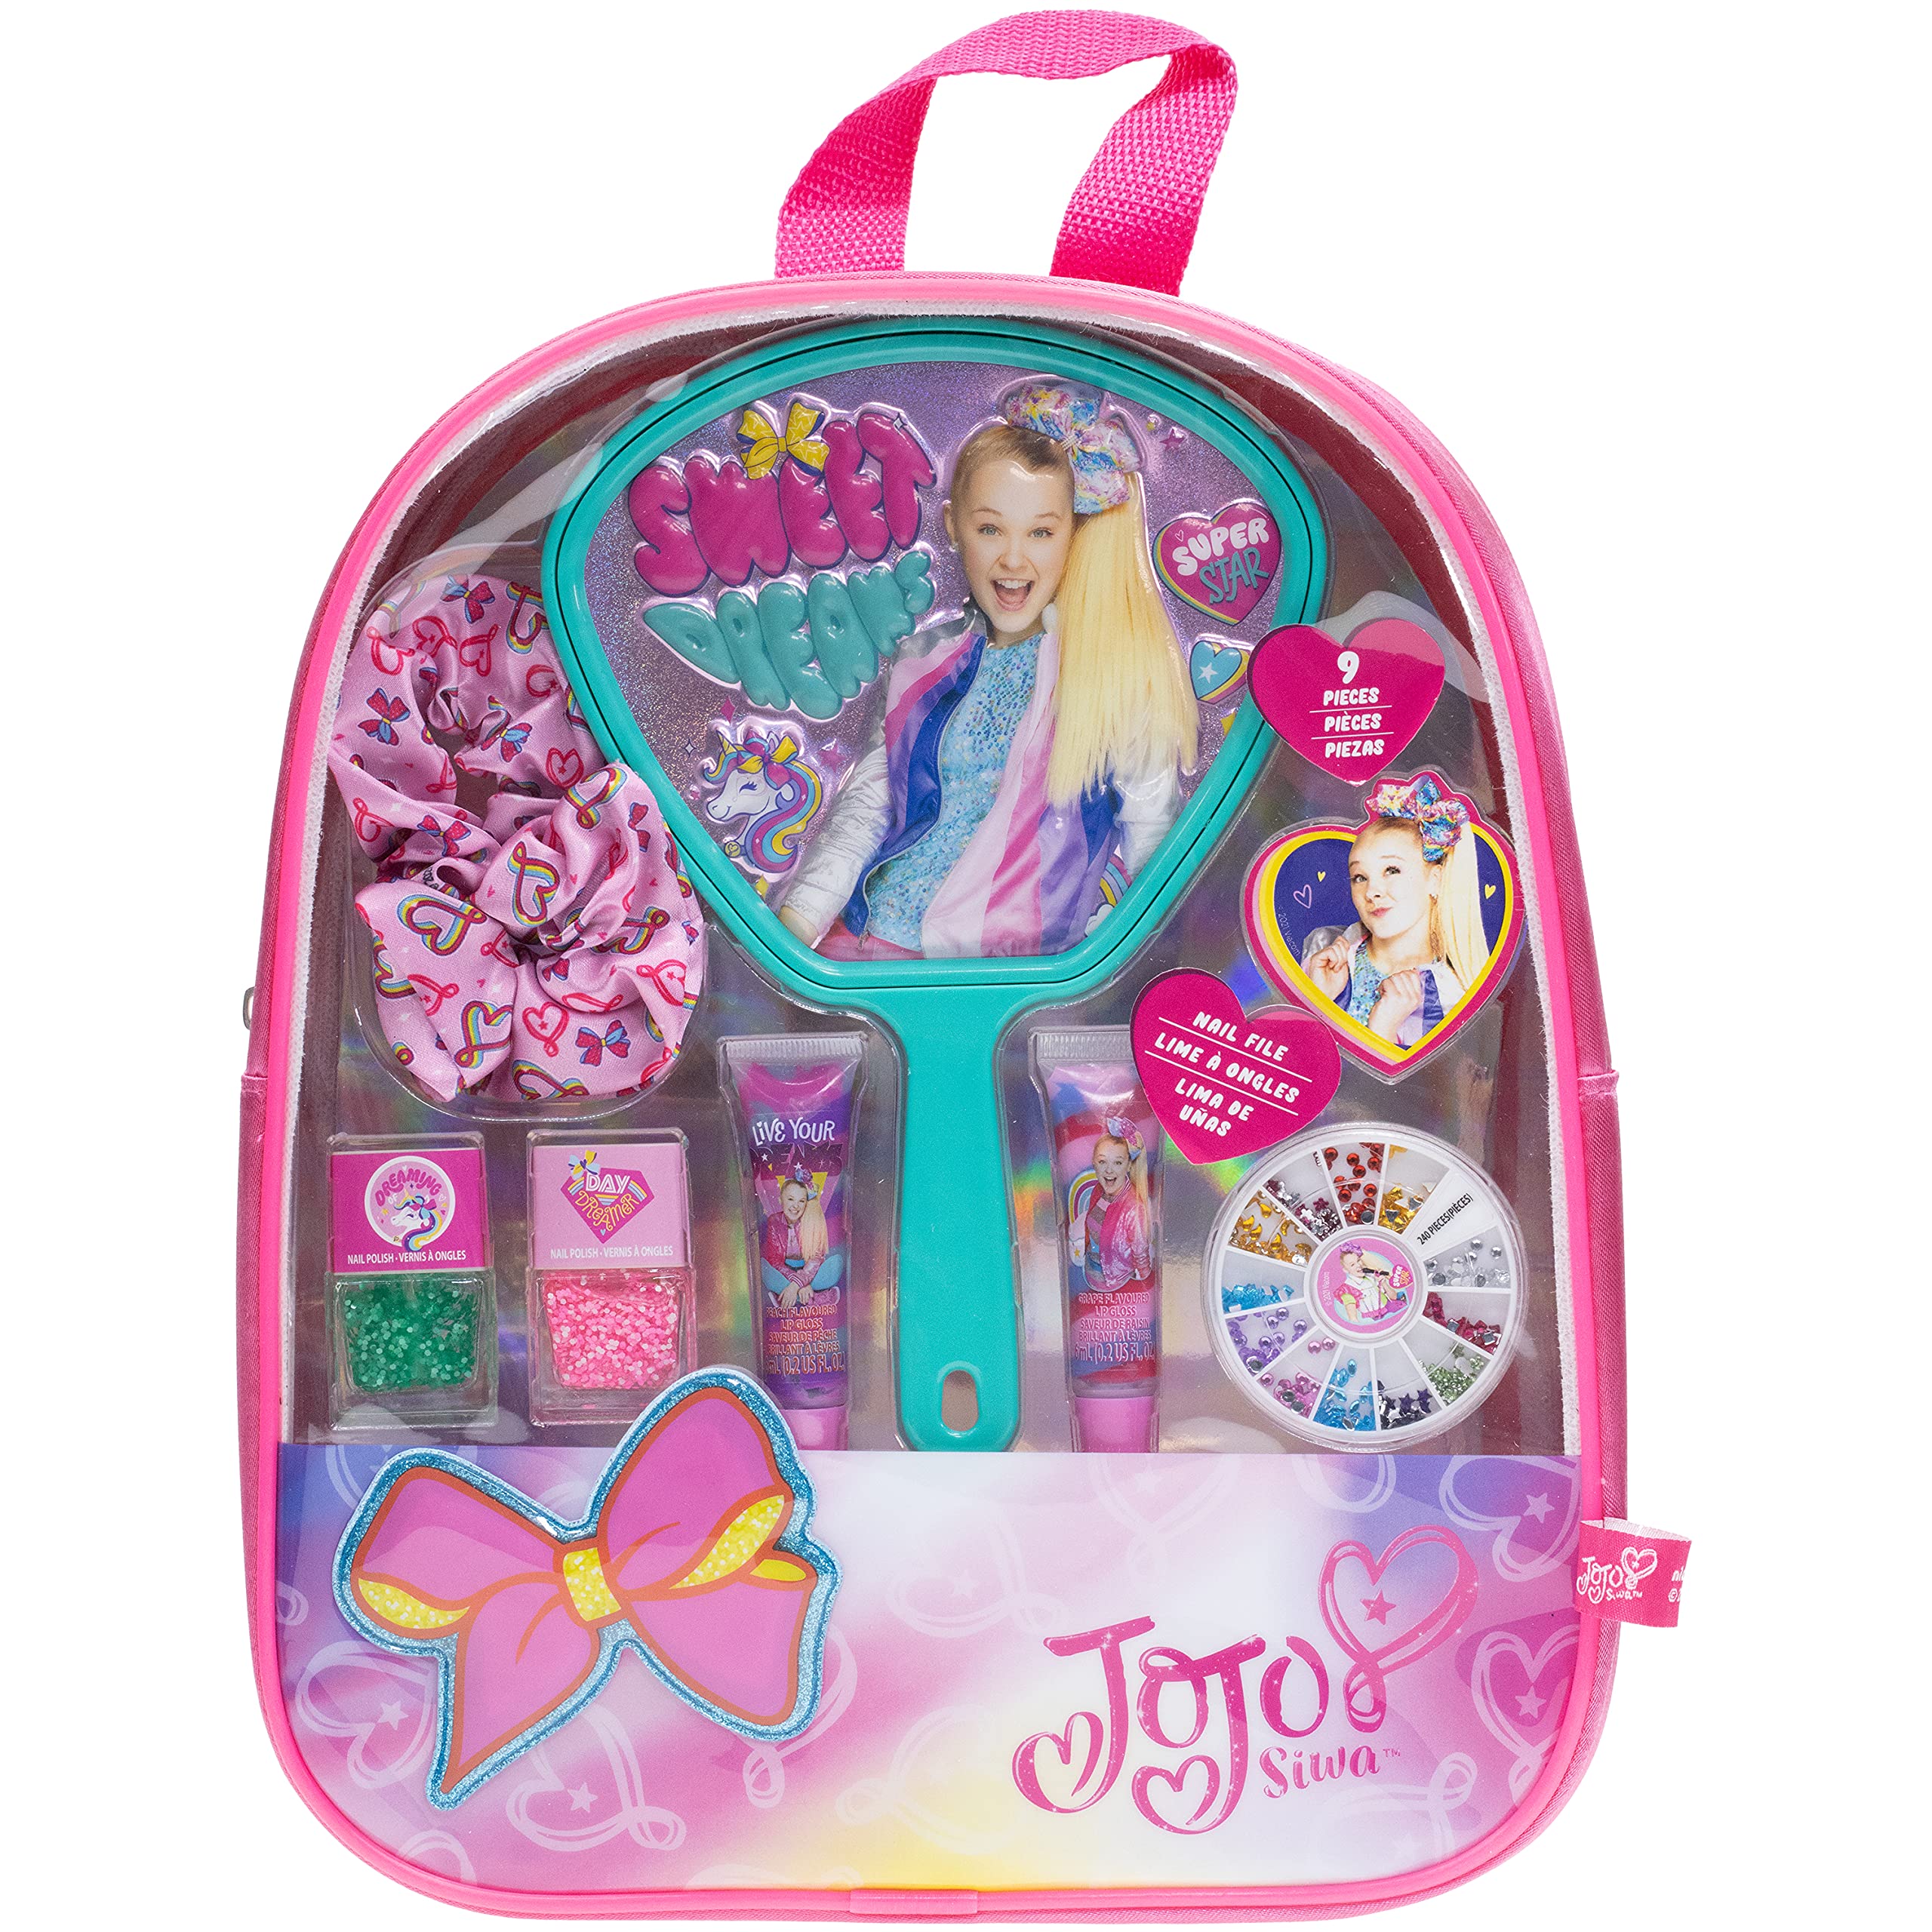 JoJo Siwa - Townley Girl Cosmetic Makeup Gift Box Set includes Lip Gloss,  Nail Polish, Hair Accessories and more! for Kids Teen Girls, Ages 3+  perfect